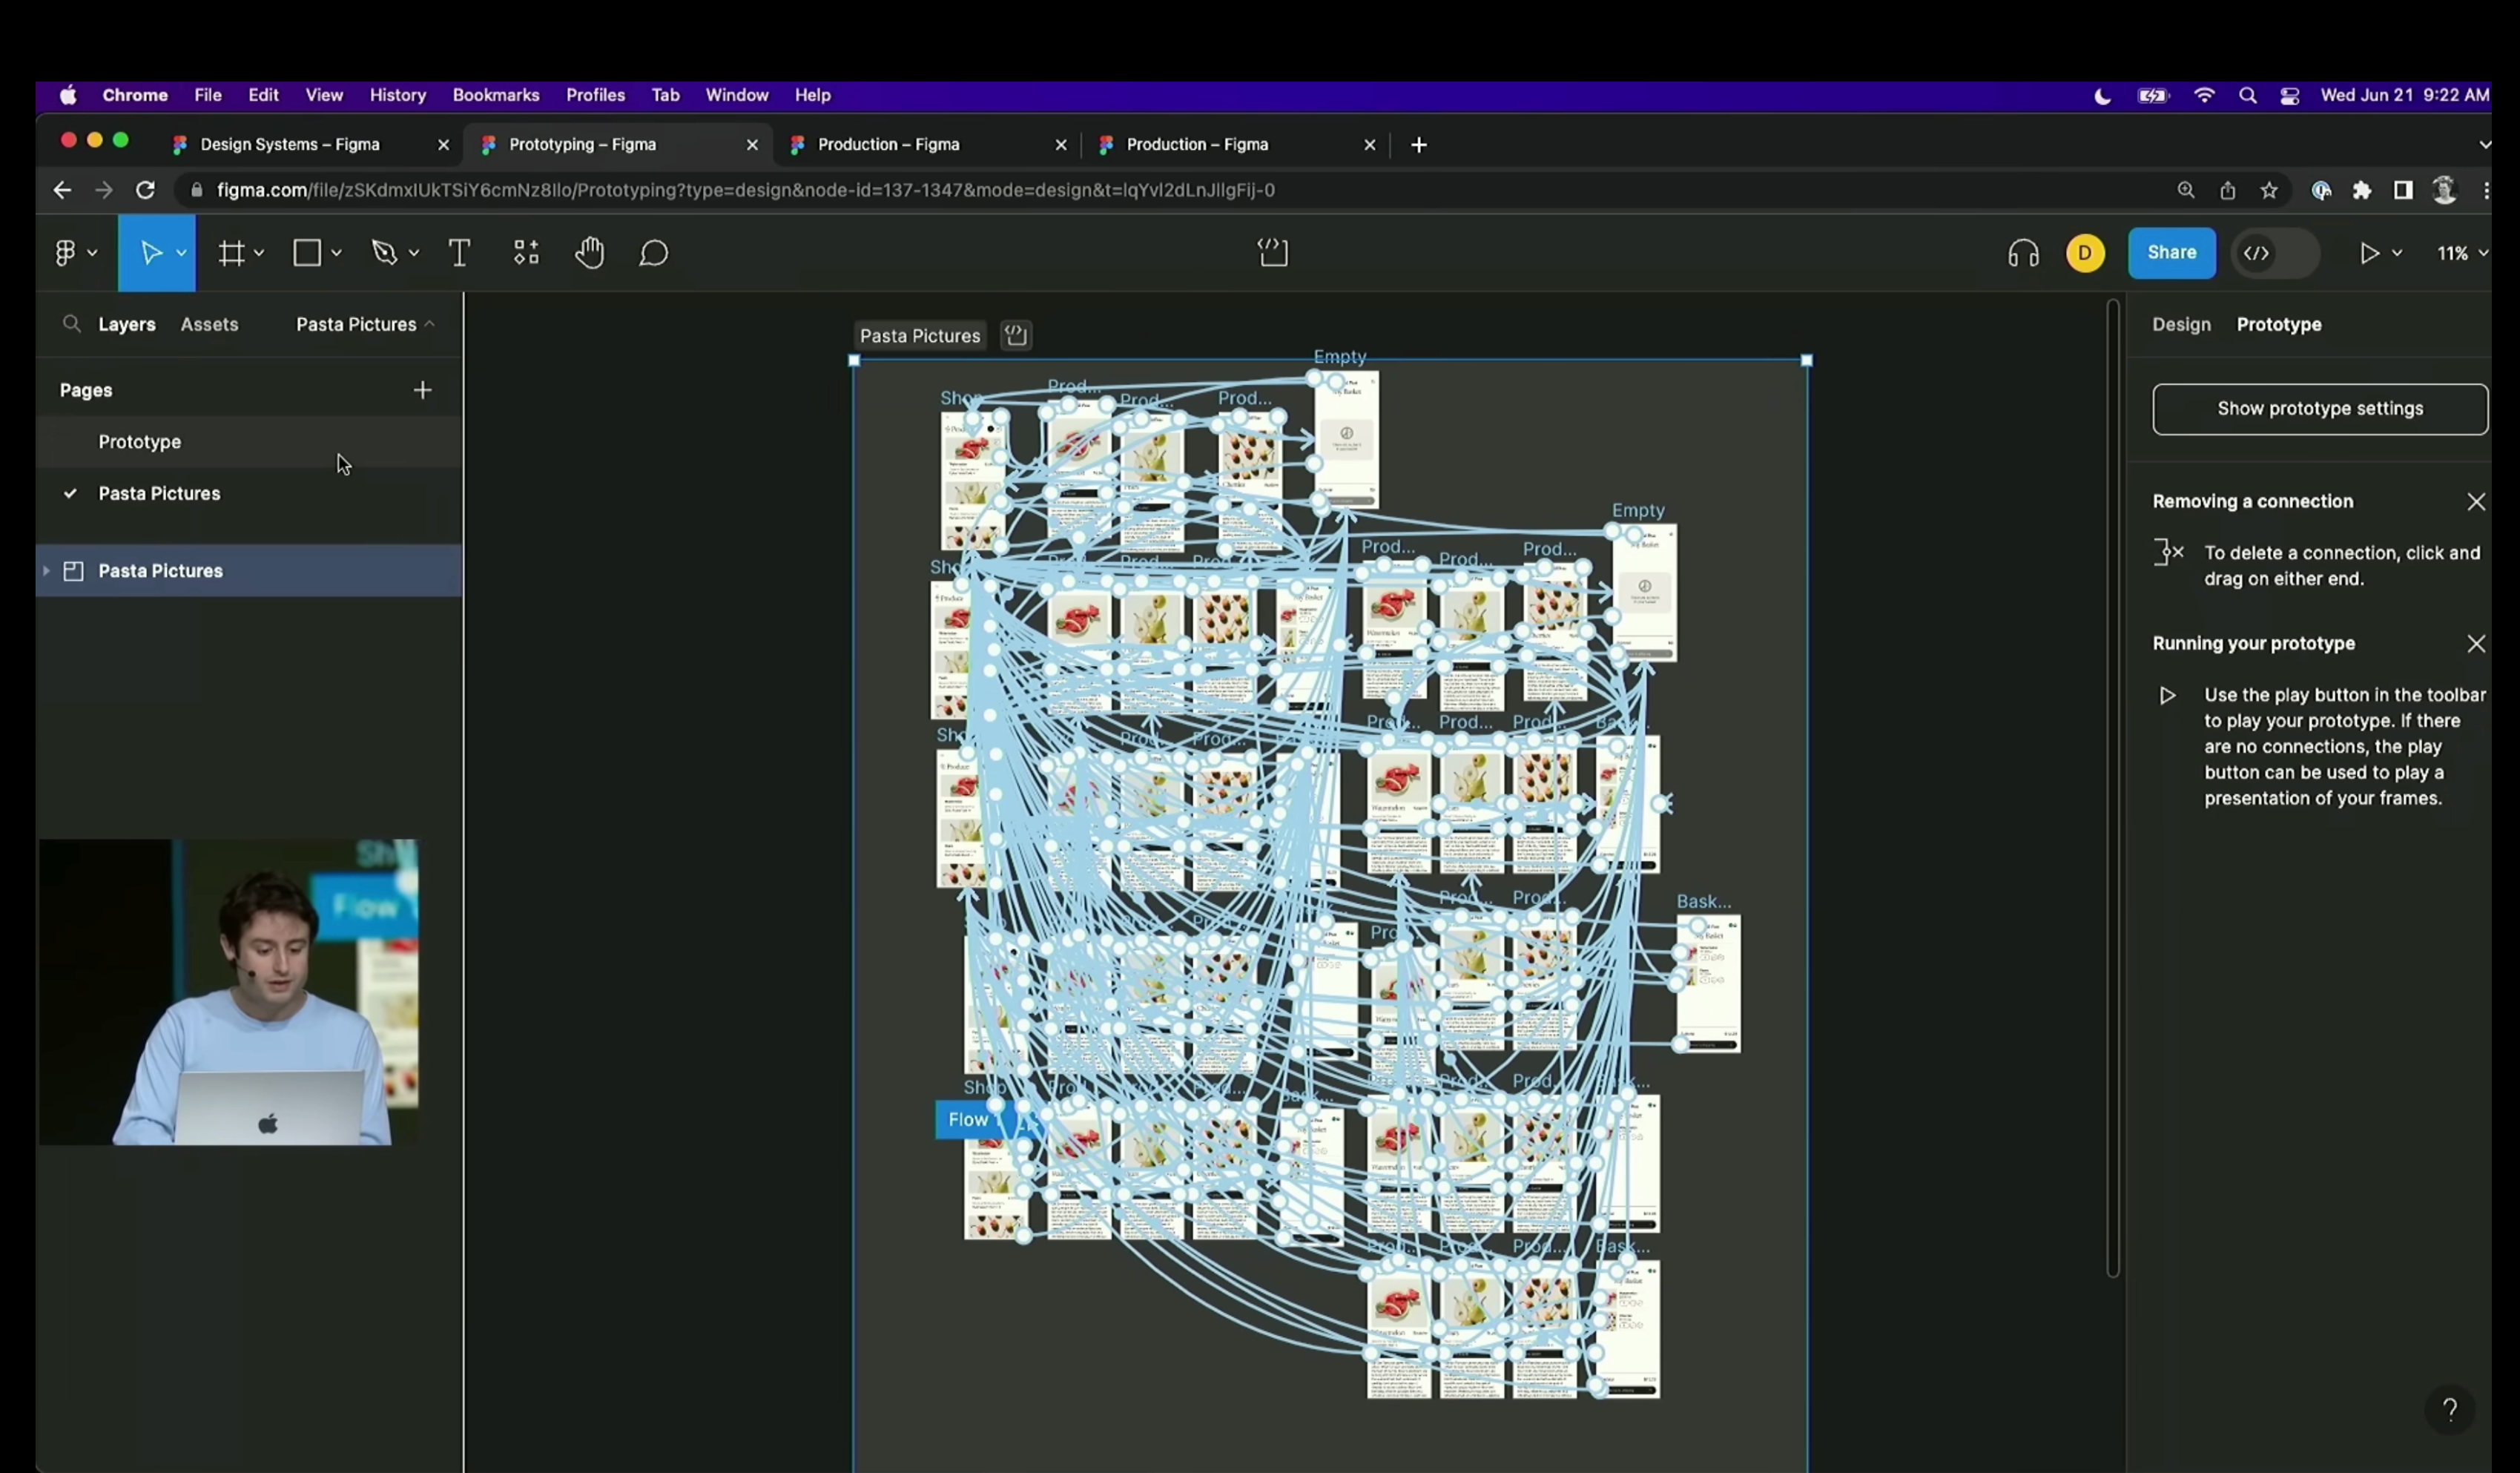 A screenshot from Figma's Config presentation, showing how prototype flows quickly become convoluted "pasta pictures" as flow arrows overlap and intersect.